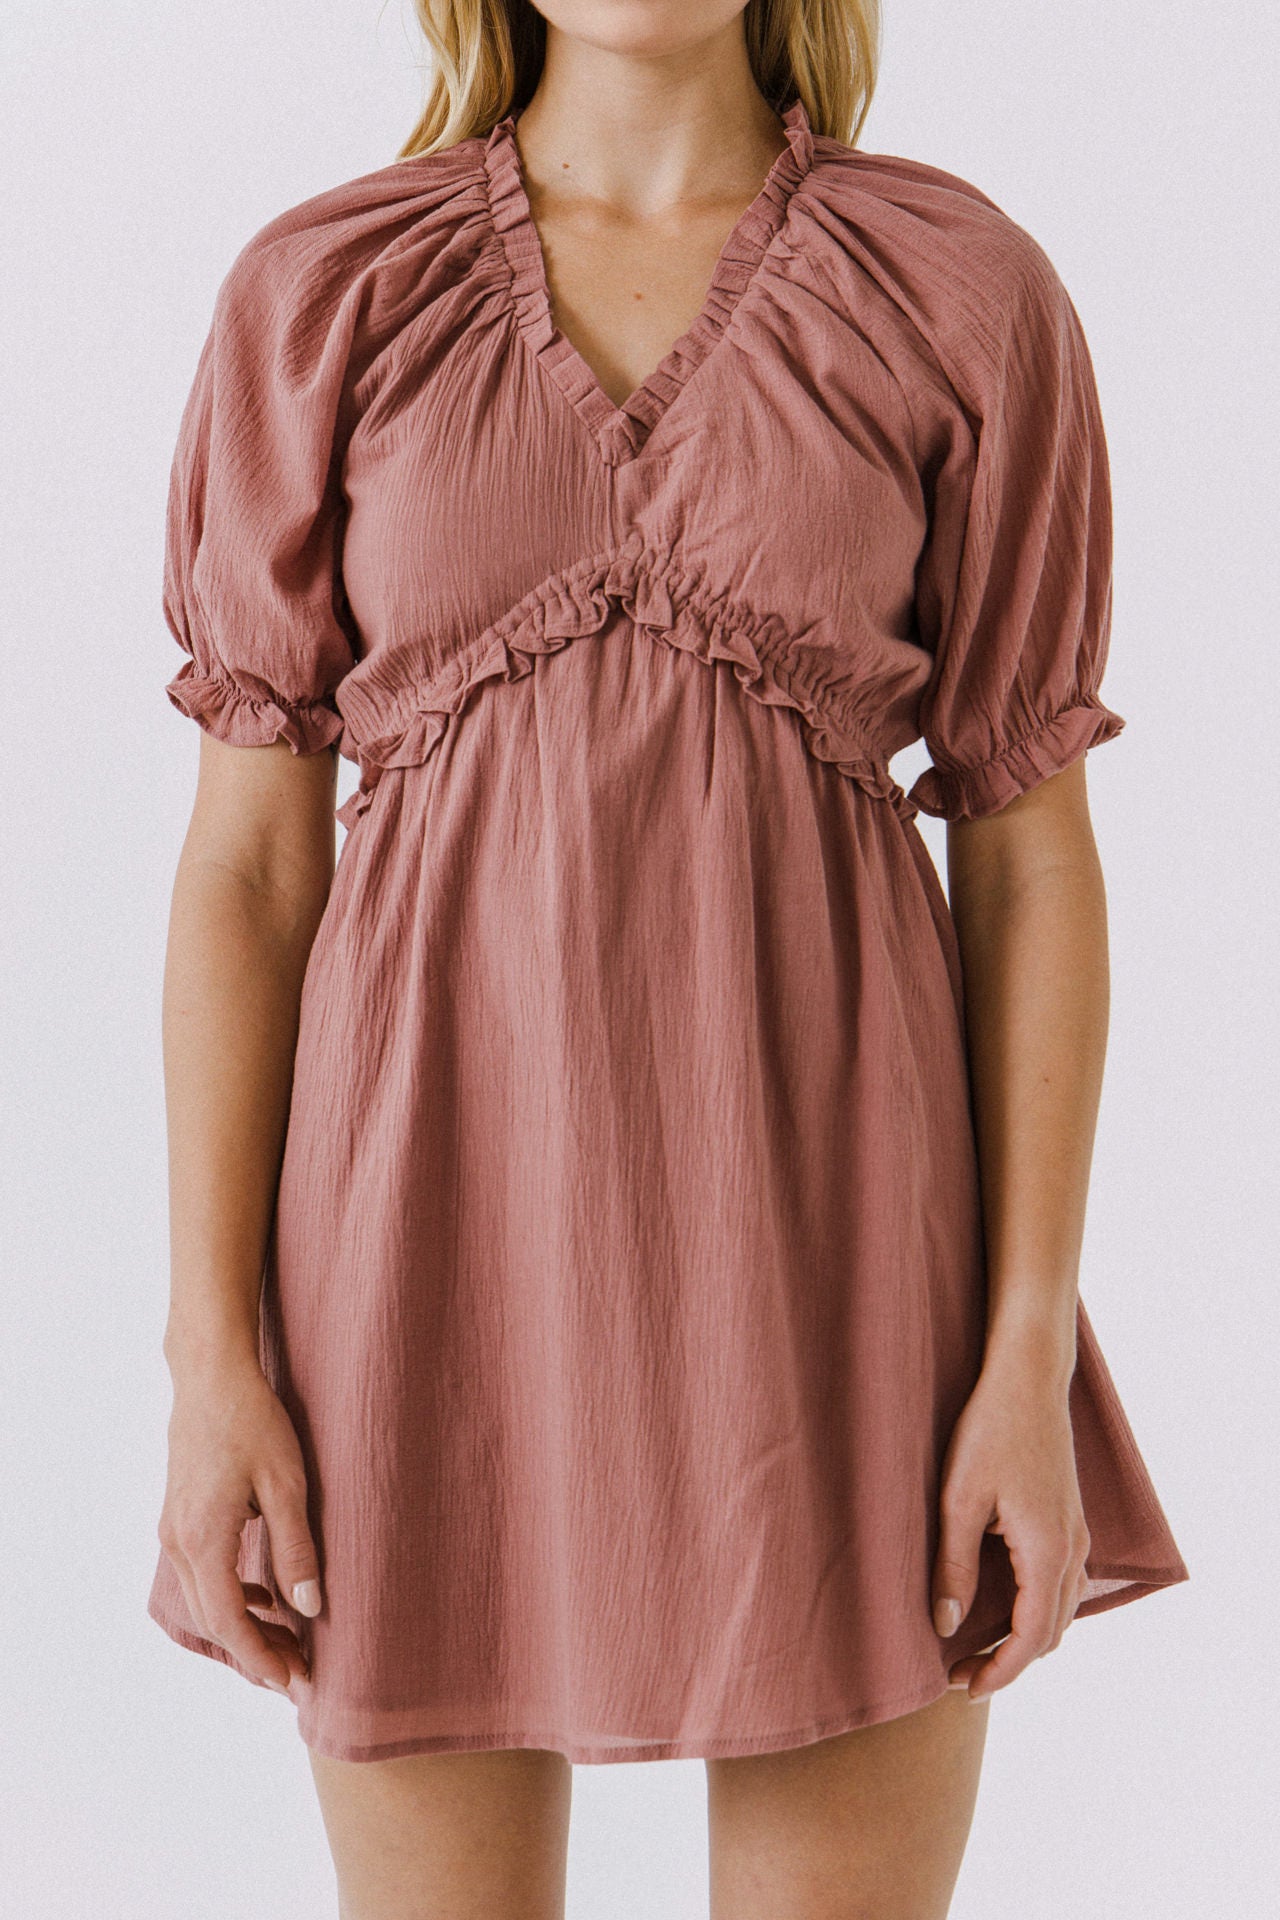 FREE THE ROSES - Ruffle V-Neck Babydoll Dress - DRESSES available at Objectrare